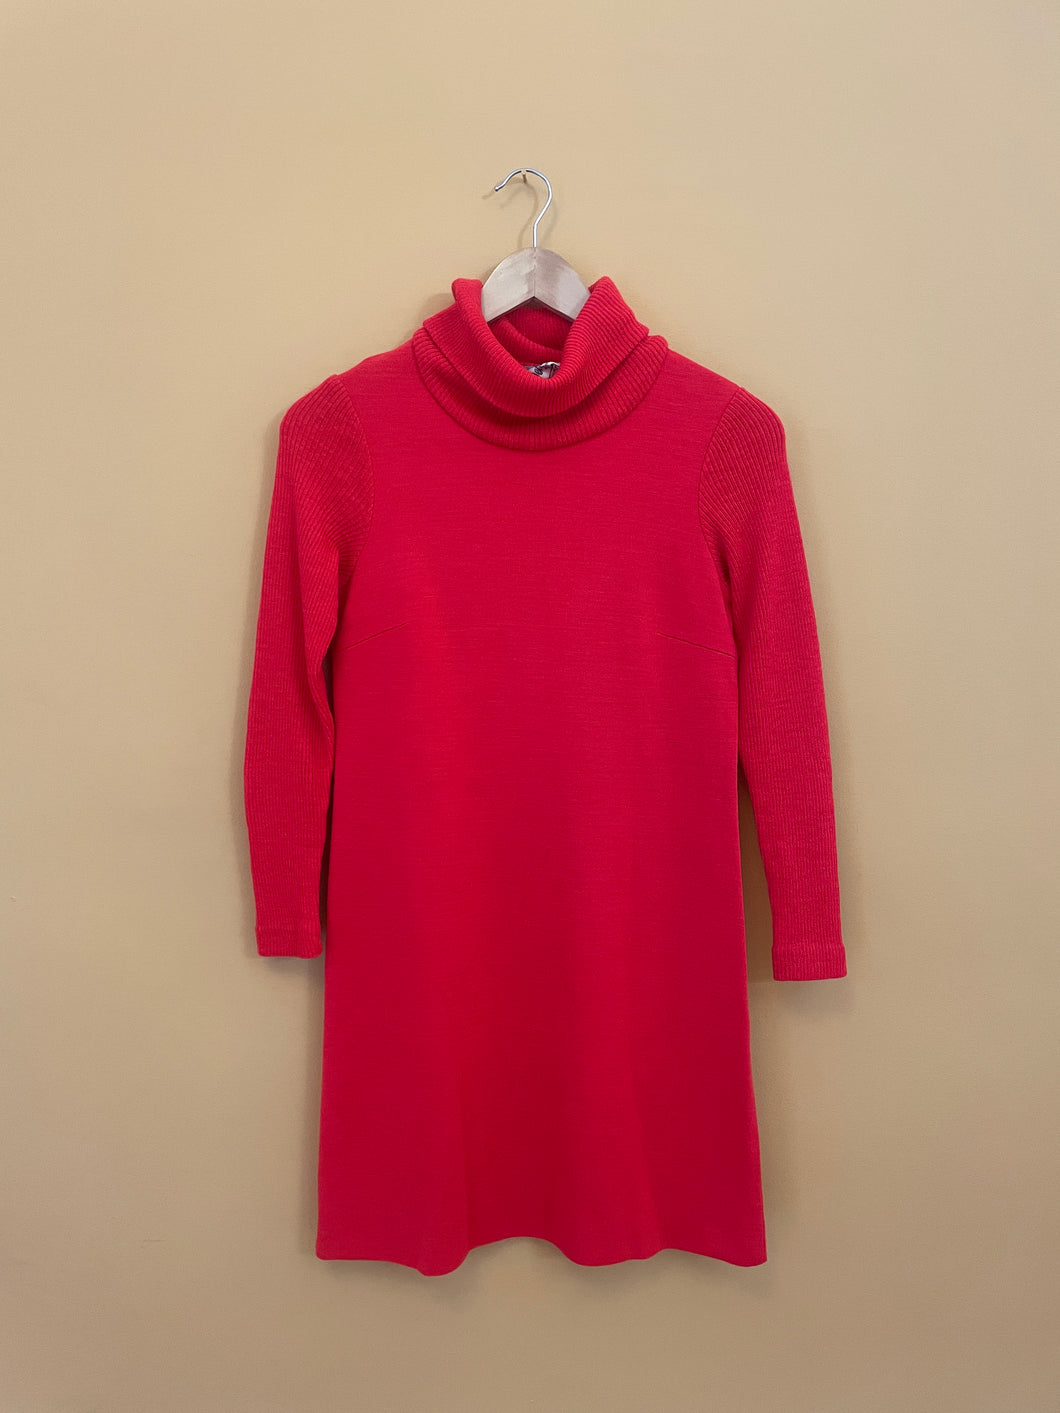 Red 70s Knitted Mini Dress S